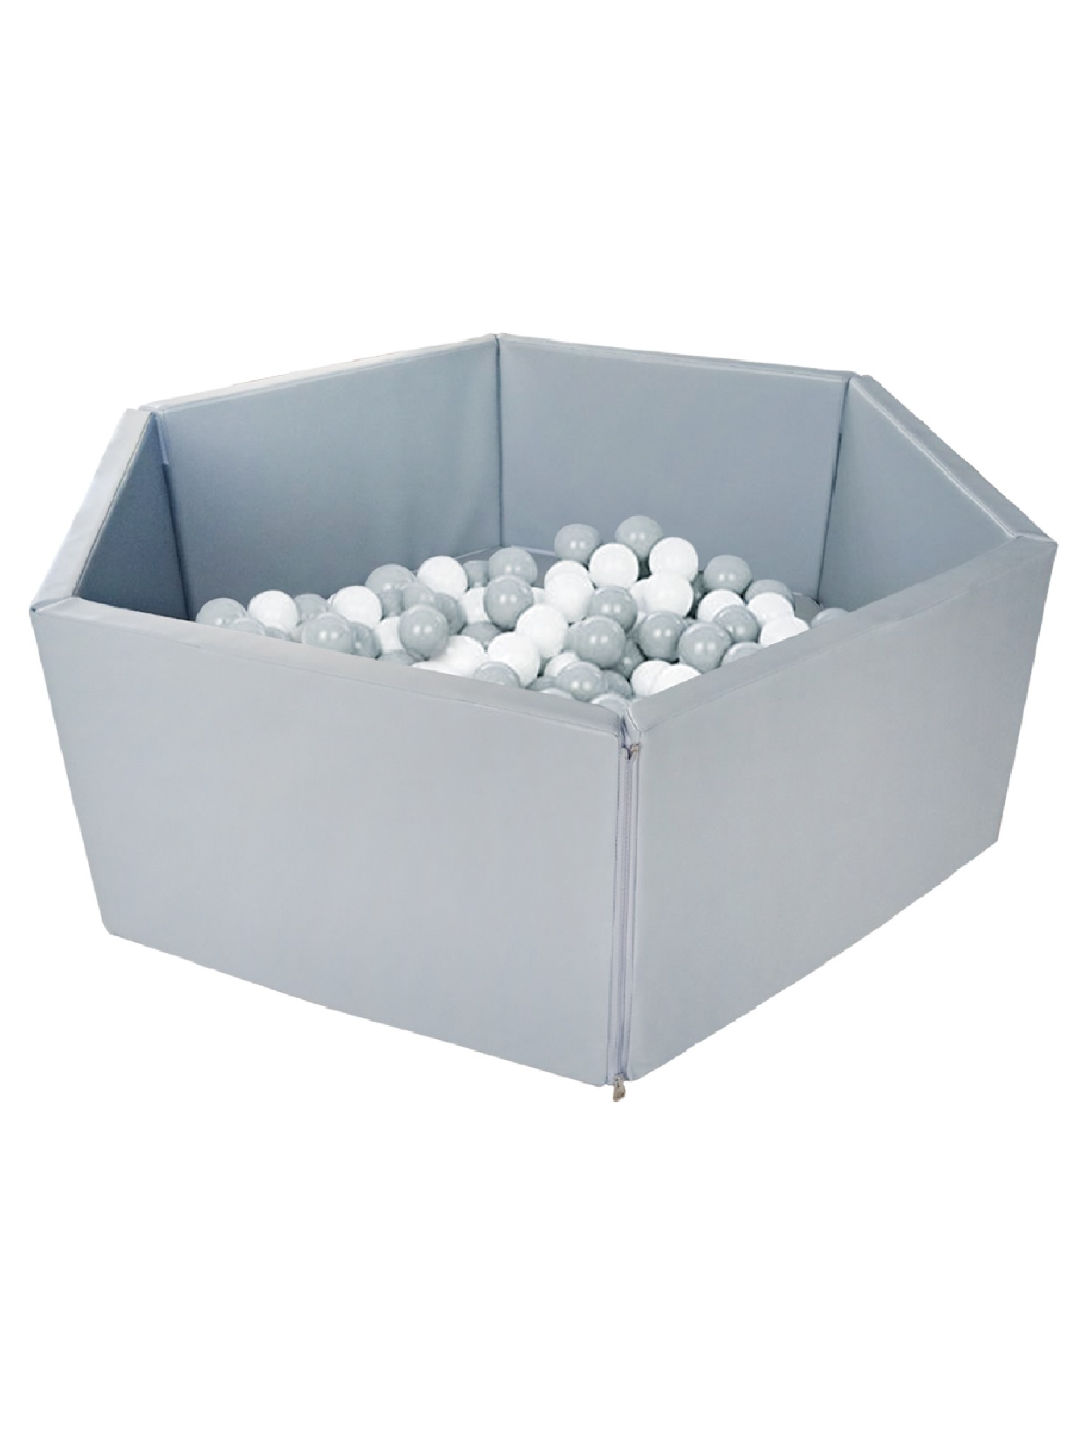 Bonjour Baby Foldable Ball Pit with 300 White & Grey Balls